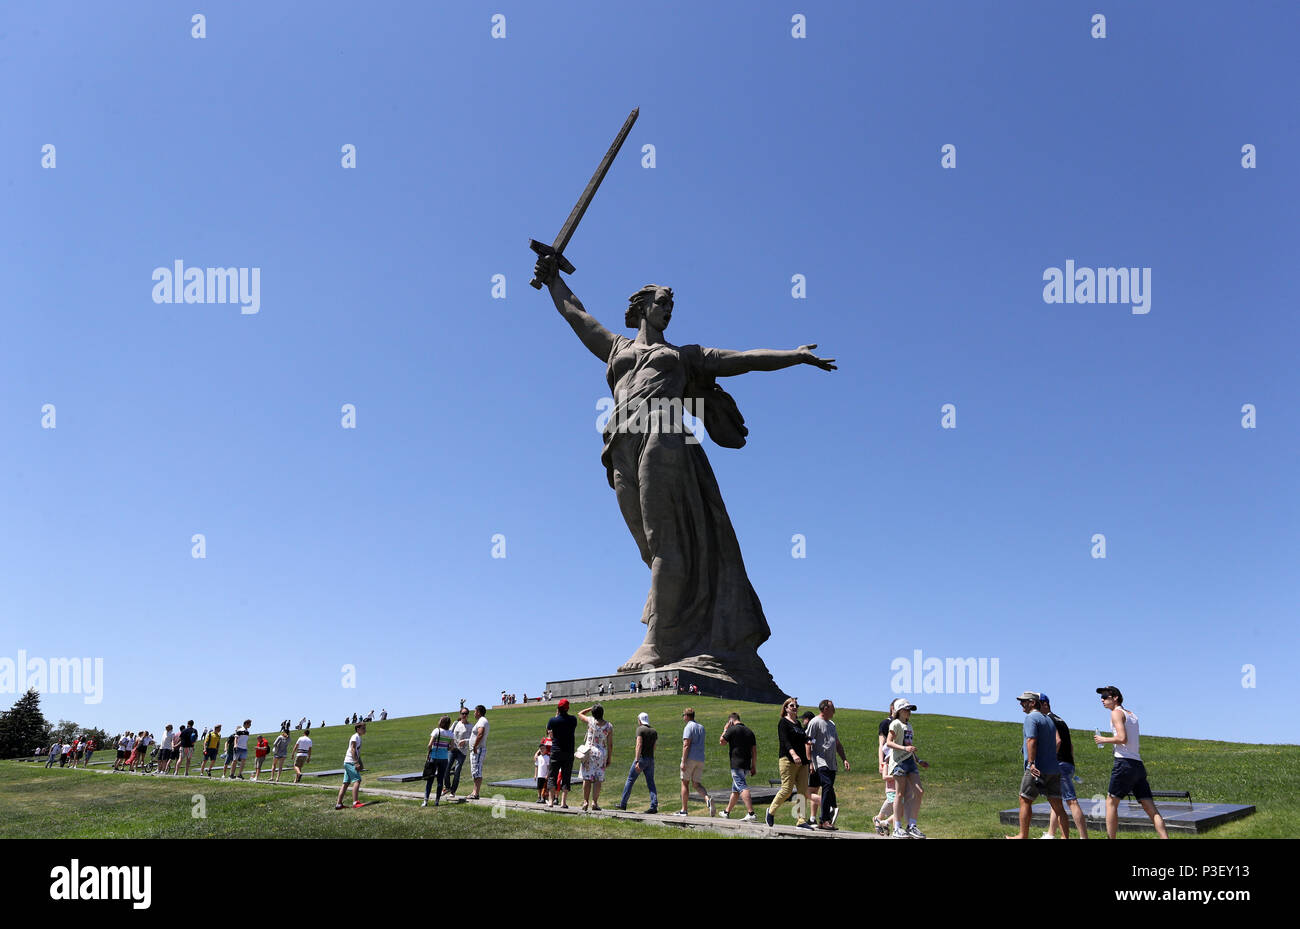 A view of the Mamayev Kurgan in Volgograd. England play Tunisia in the FIFA World Cup 2018 at the Volgograd Arena later today. PRESS ASSOCIATION Photo. Picture date: Monday June 17, 2018. See PA story WORLDCUP England. Photo credit should read: Owen Humphreys/PA Wire. Stock Photo